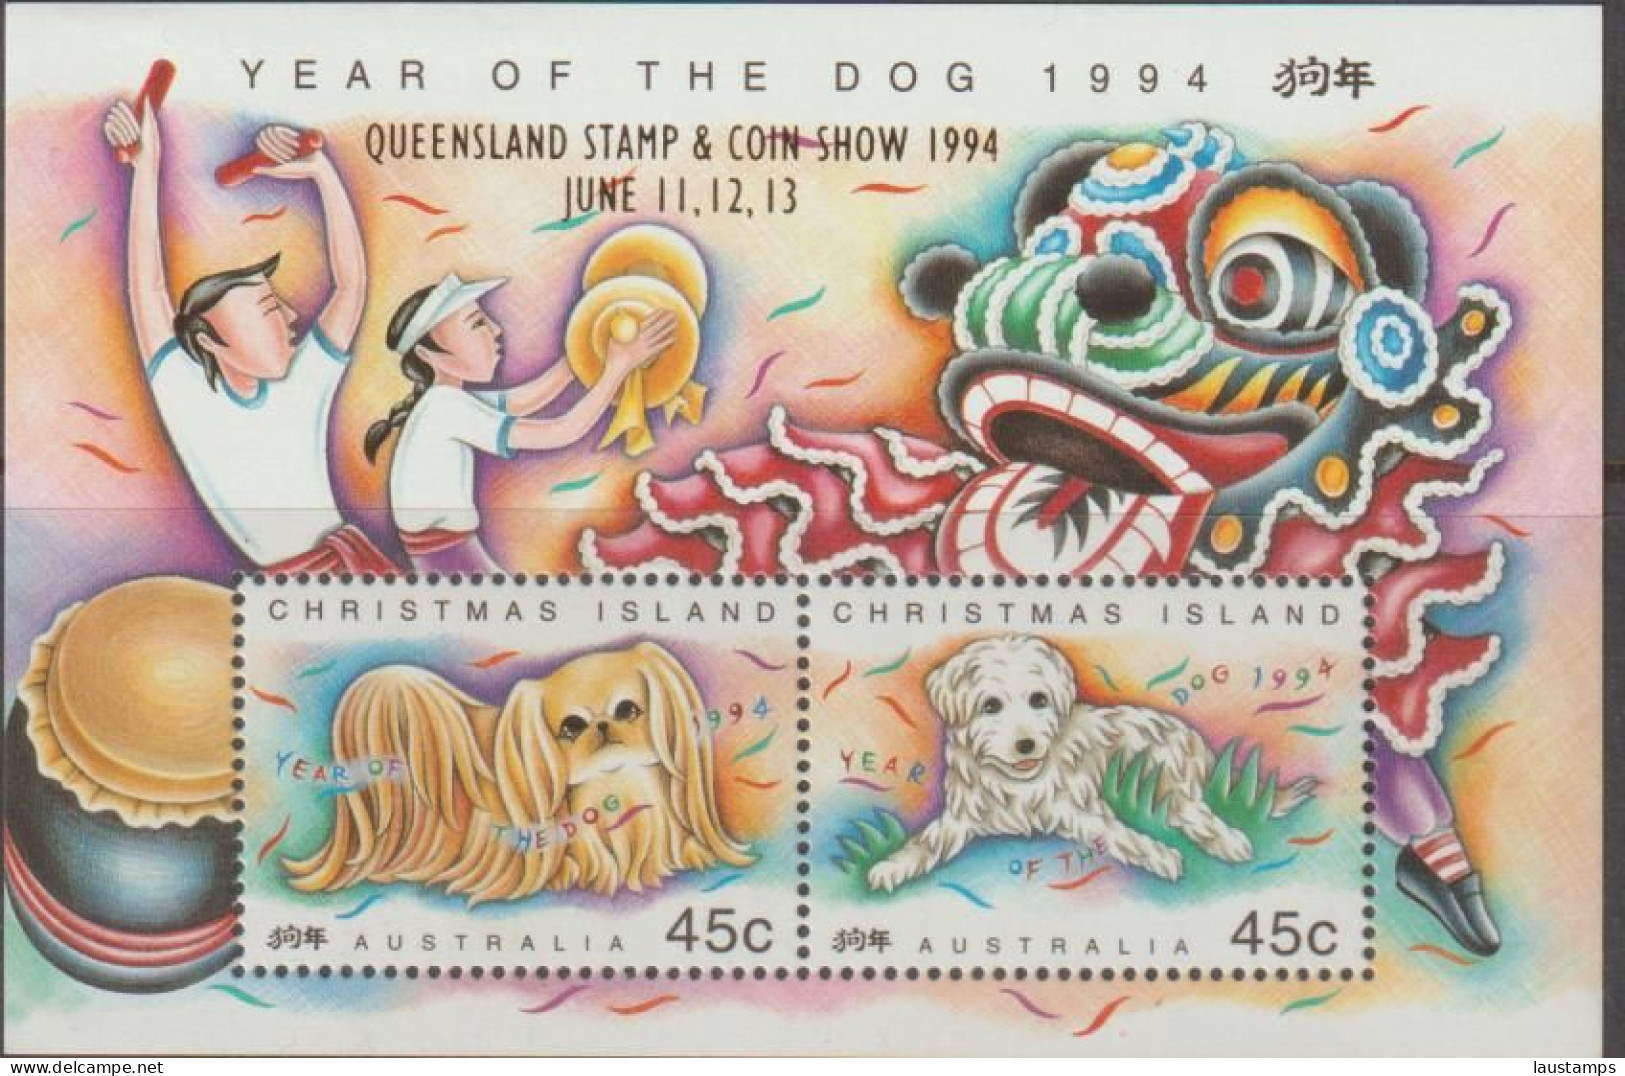 Christmas Island 1994 Year Of The Dog Ovpt Queensland Stamp & Coin Show S/S MNH - Año Nuevo Chino